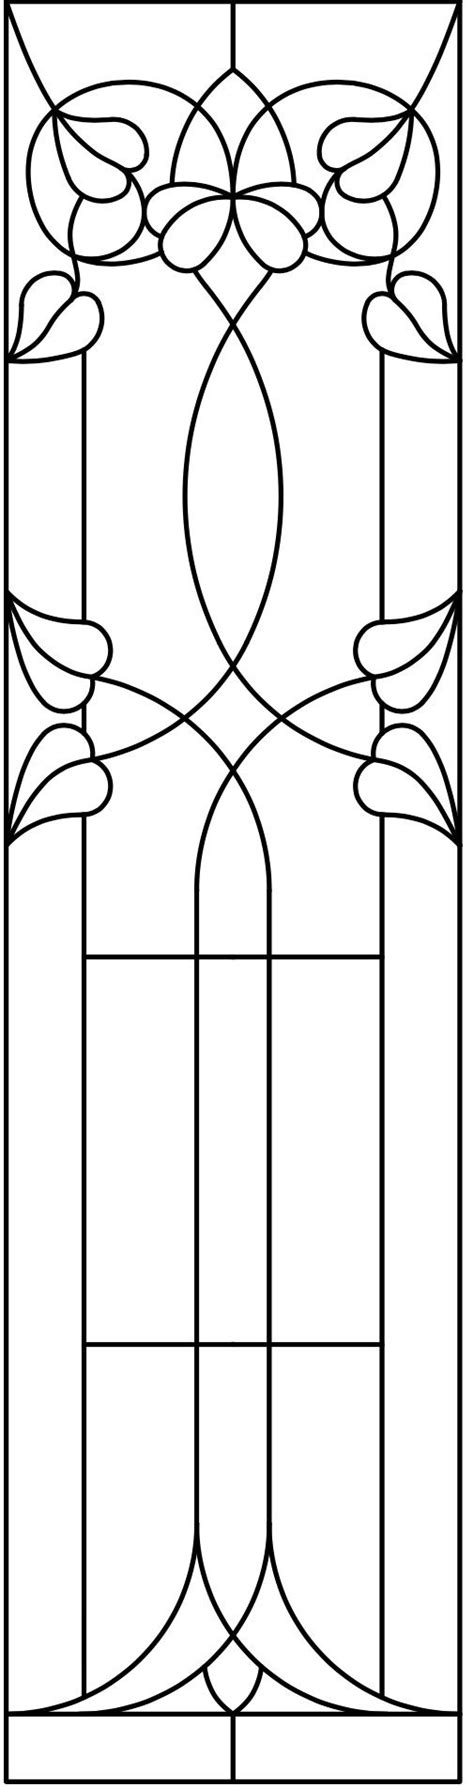 Pin By M Borgetti On Stained Glass Old English Stained Glass Patterns Free Stained Glass